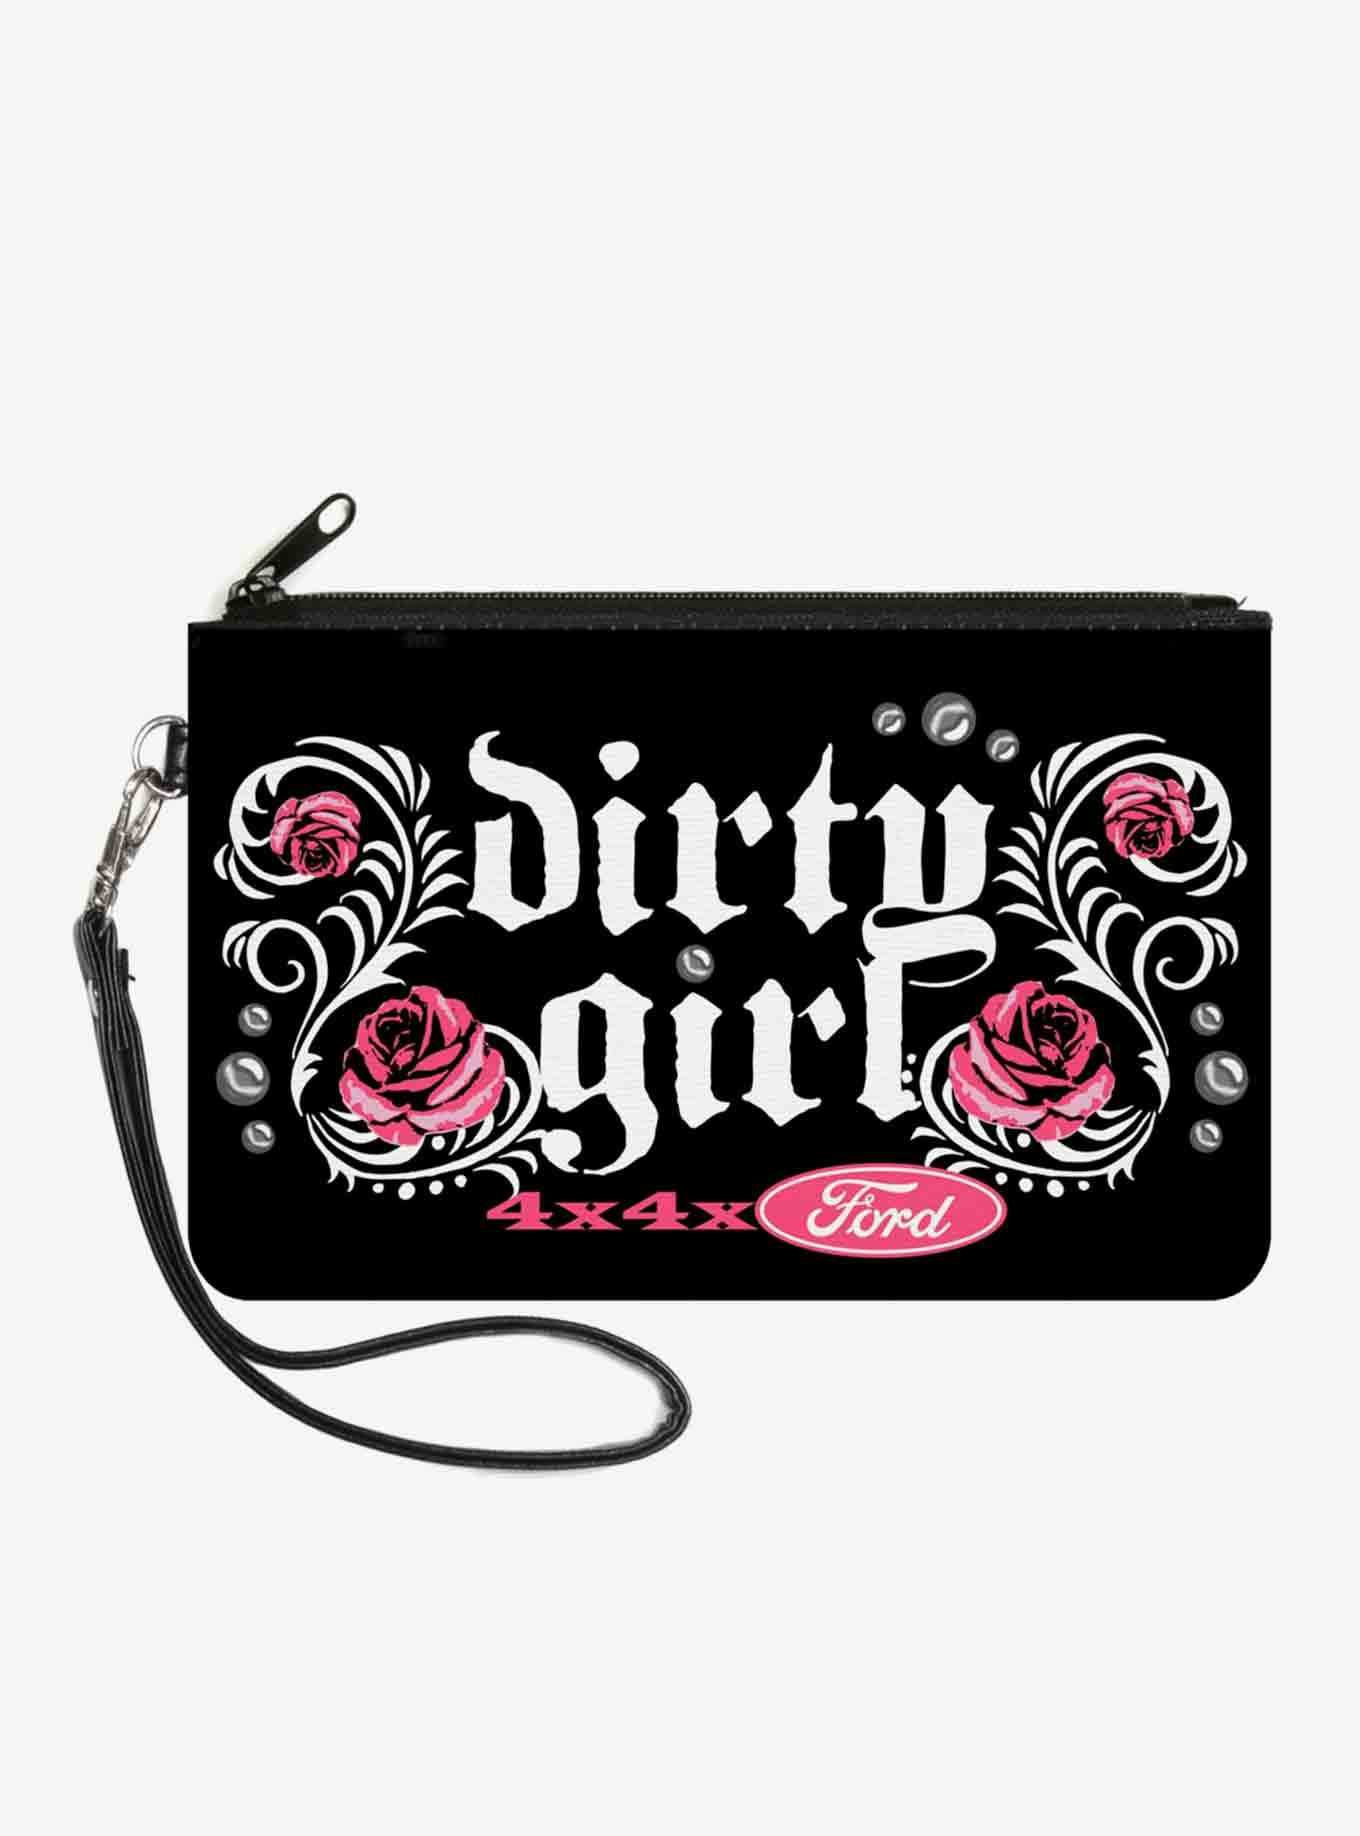 Floral Dirty Girl 4x4 Ford Pink Canvas Zip Clutch Wallet, , hi-res